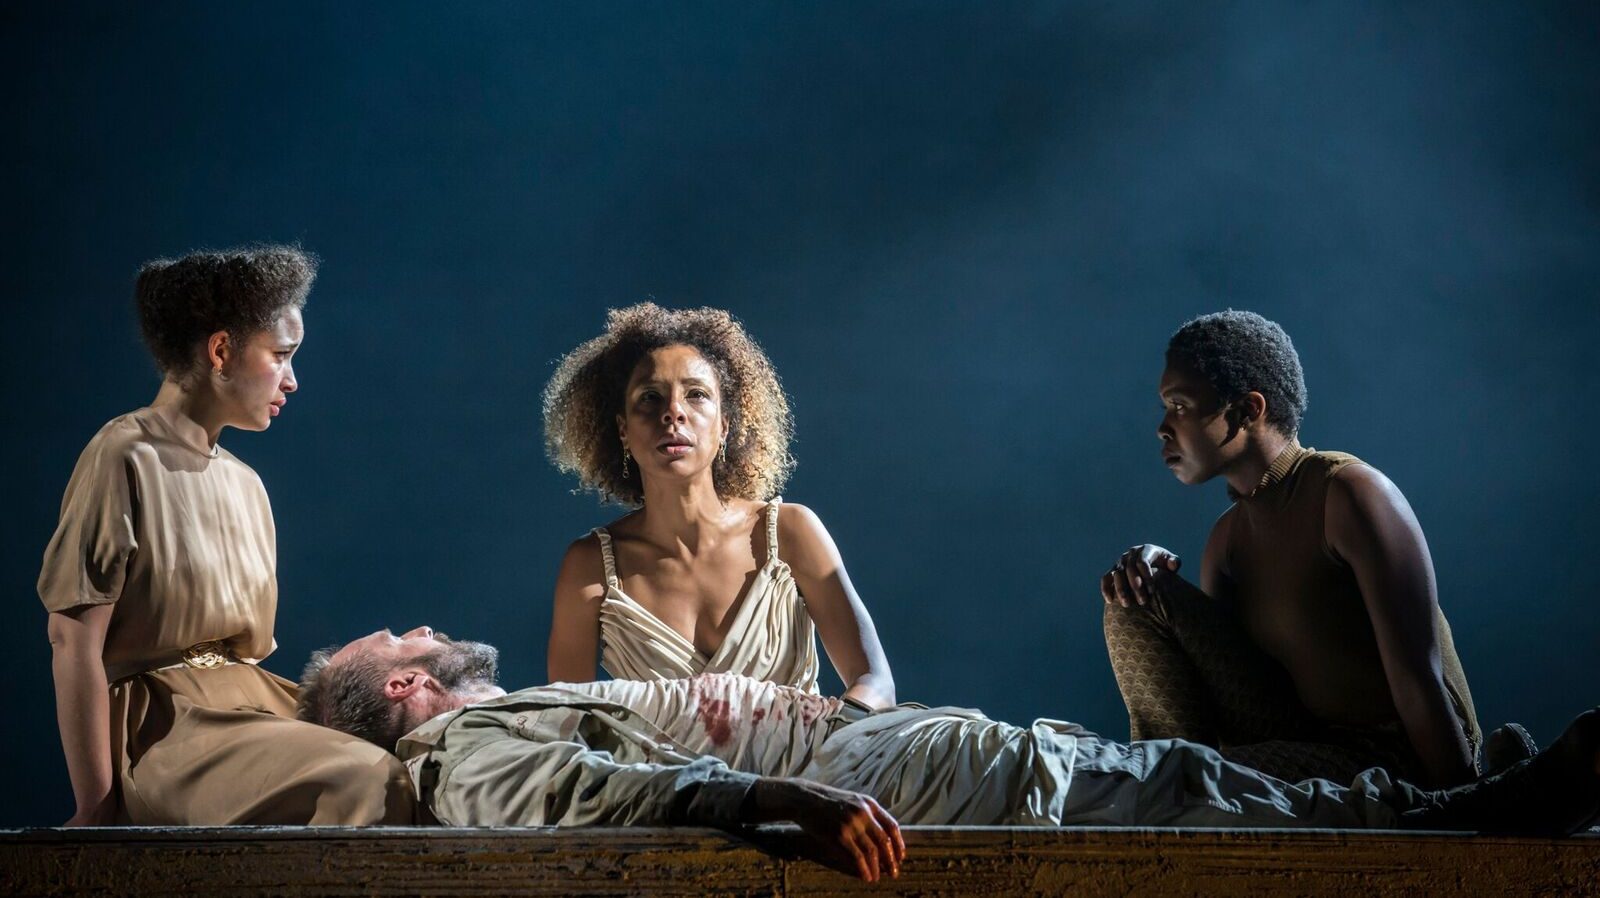 Cleopatra (Sophie Okonedo) kneels behind a dying Antony (Ralph Fiennes) flanked by two servants.